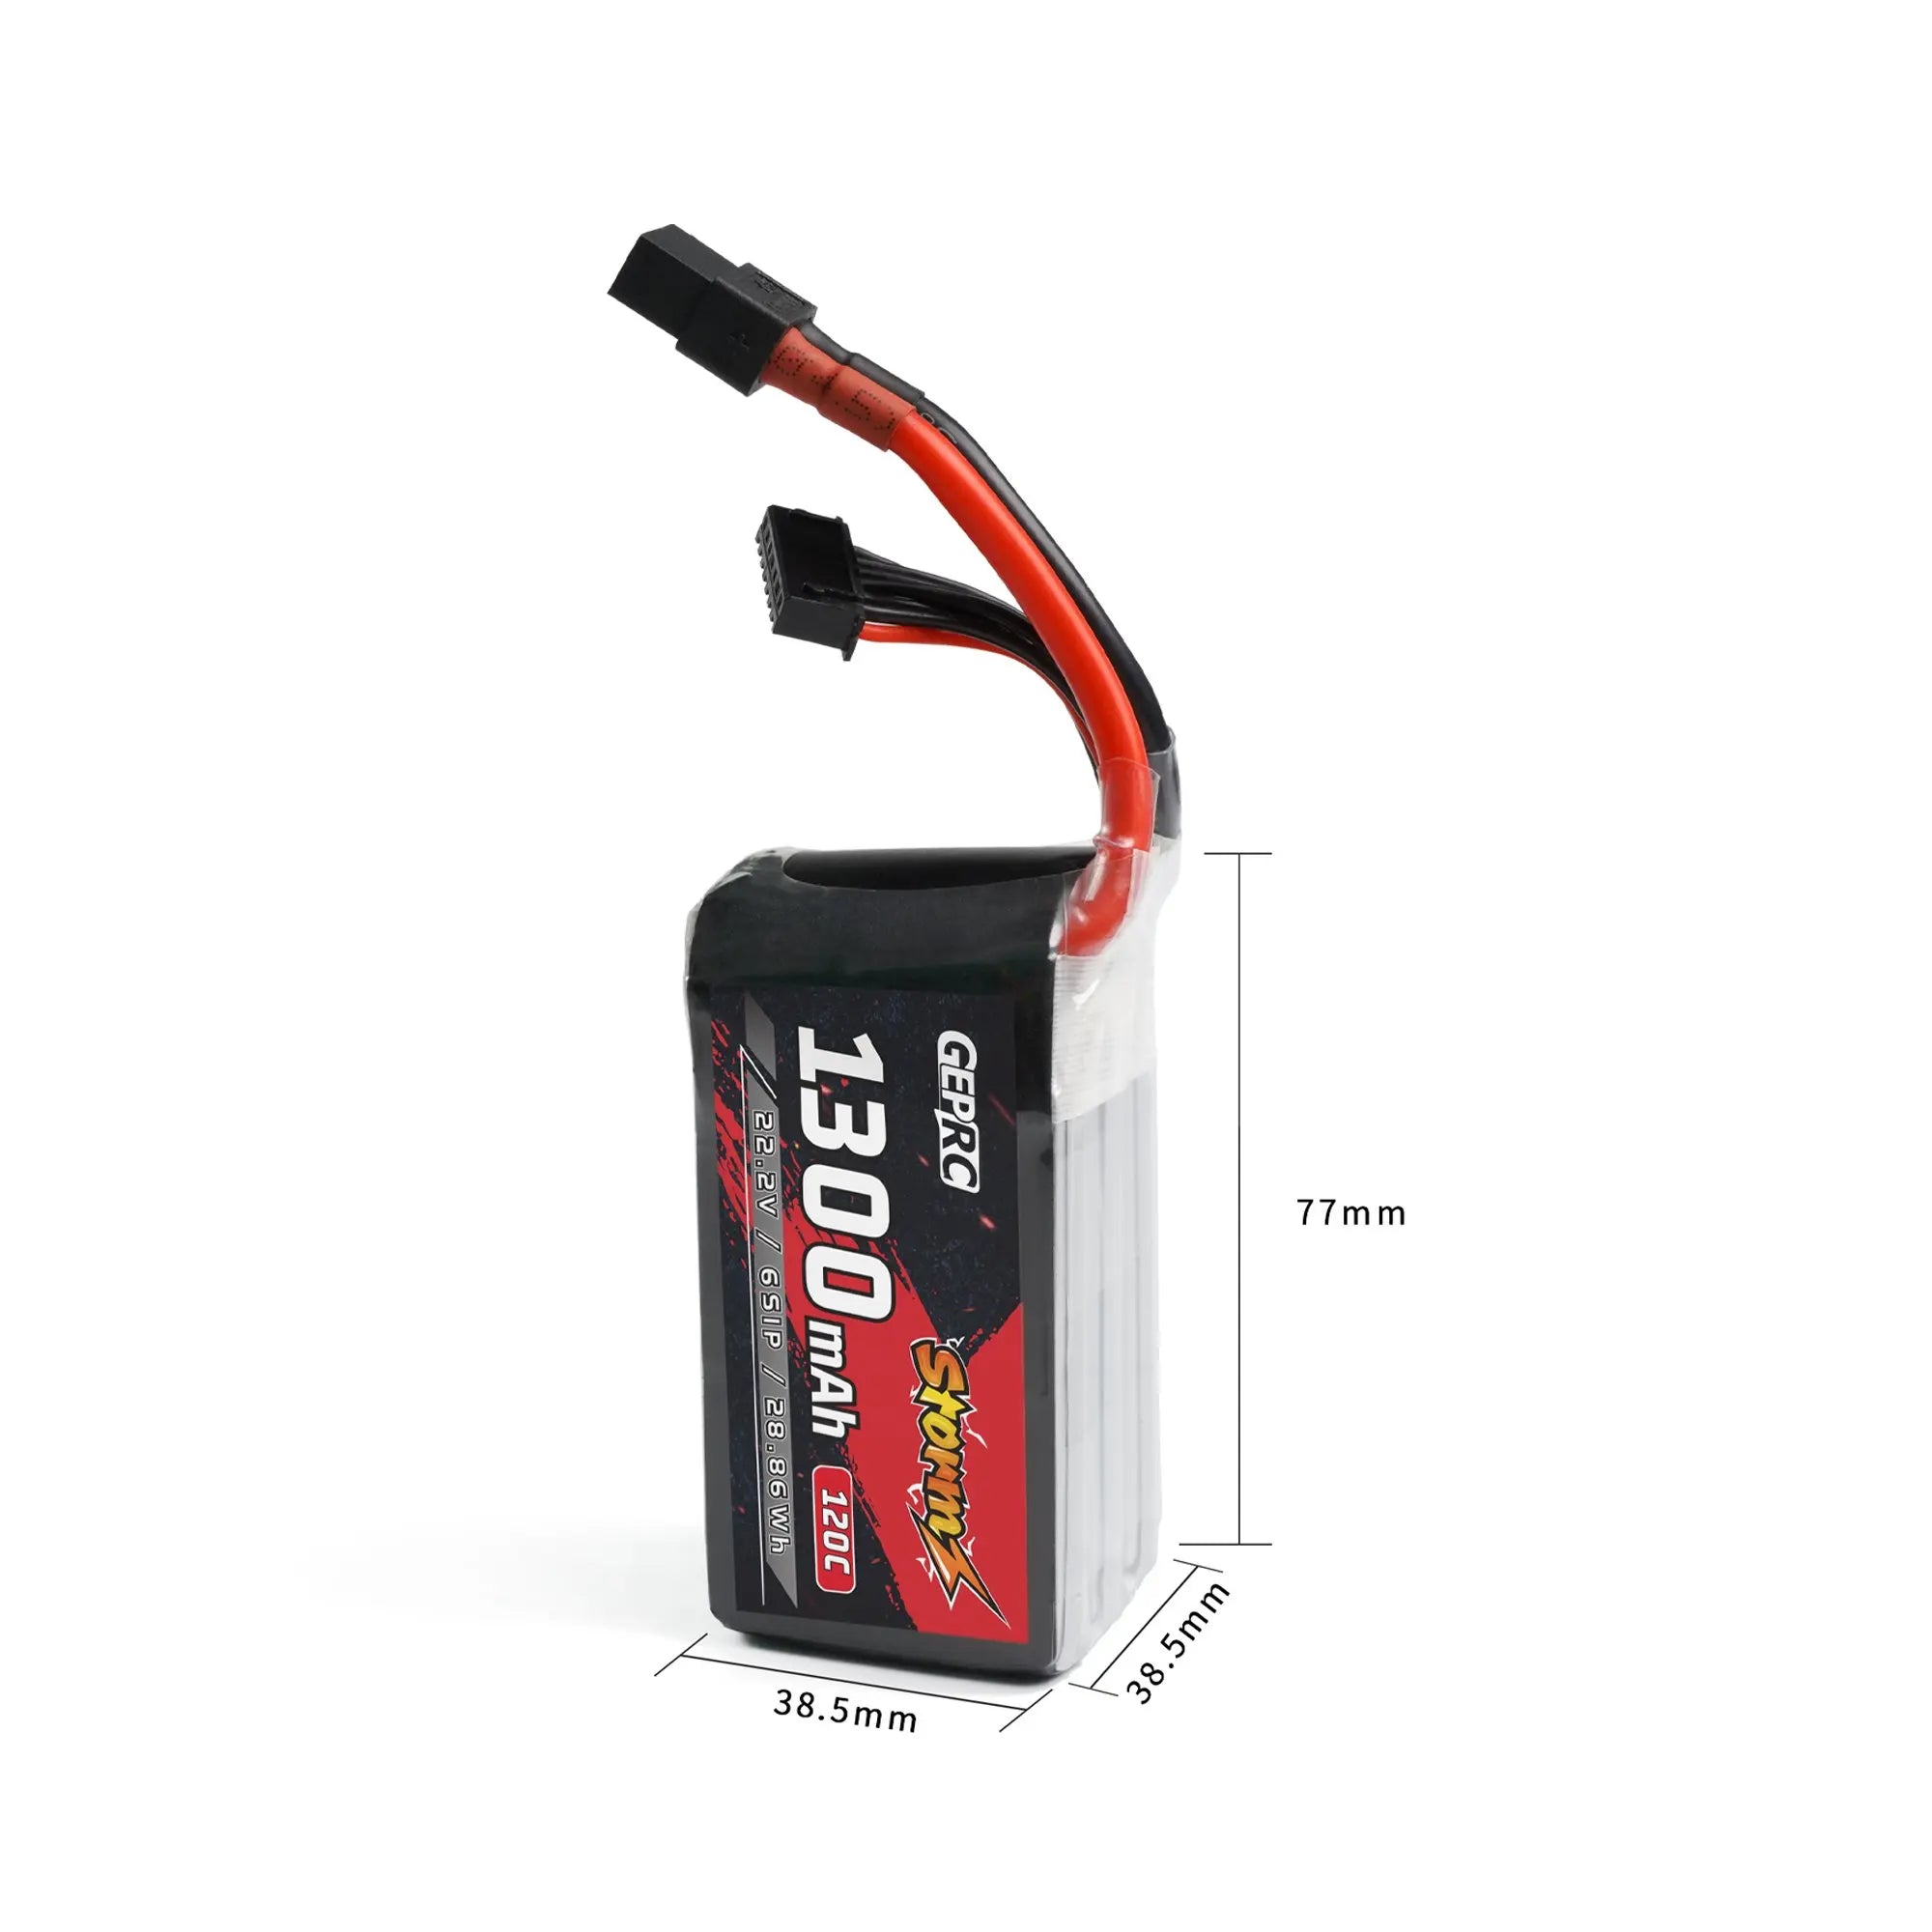 GEPRC Storm 6S 1300mAh 120C Lipo Battery, it is forbidden to reverse the positive and negative poles of the battery (to avoid short circuit